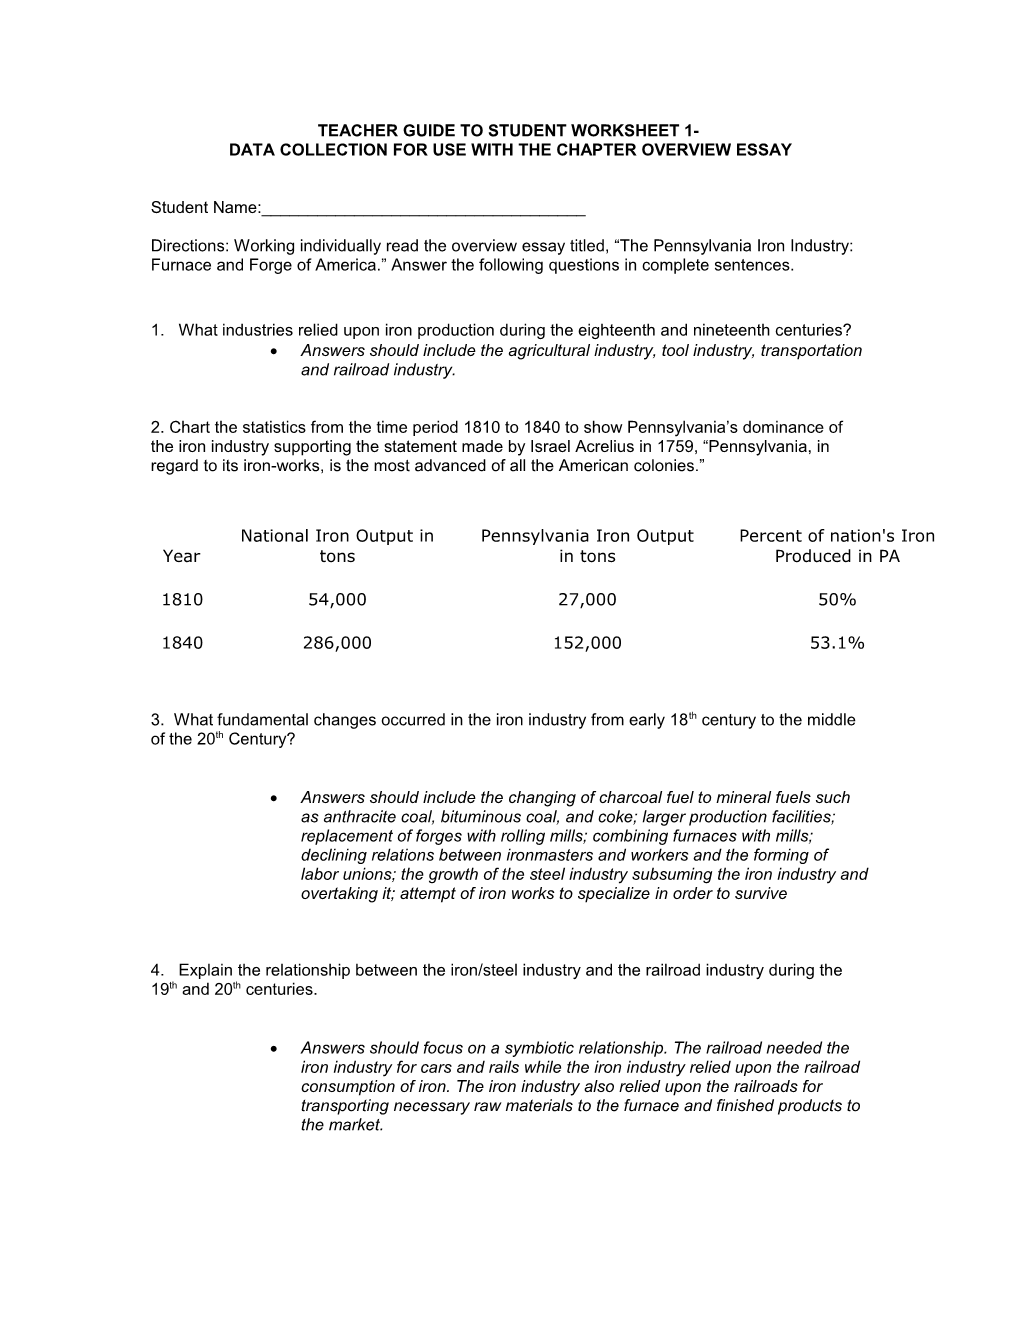 Student Worksheet 1: Data Collection